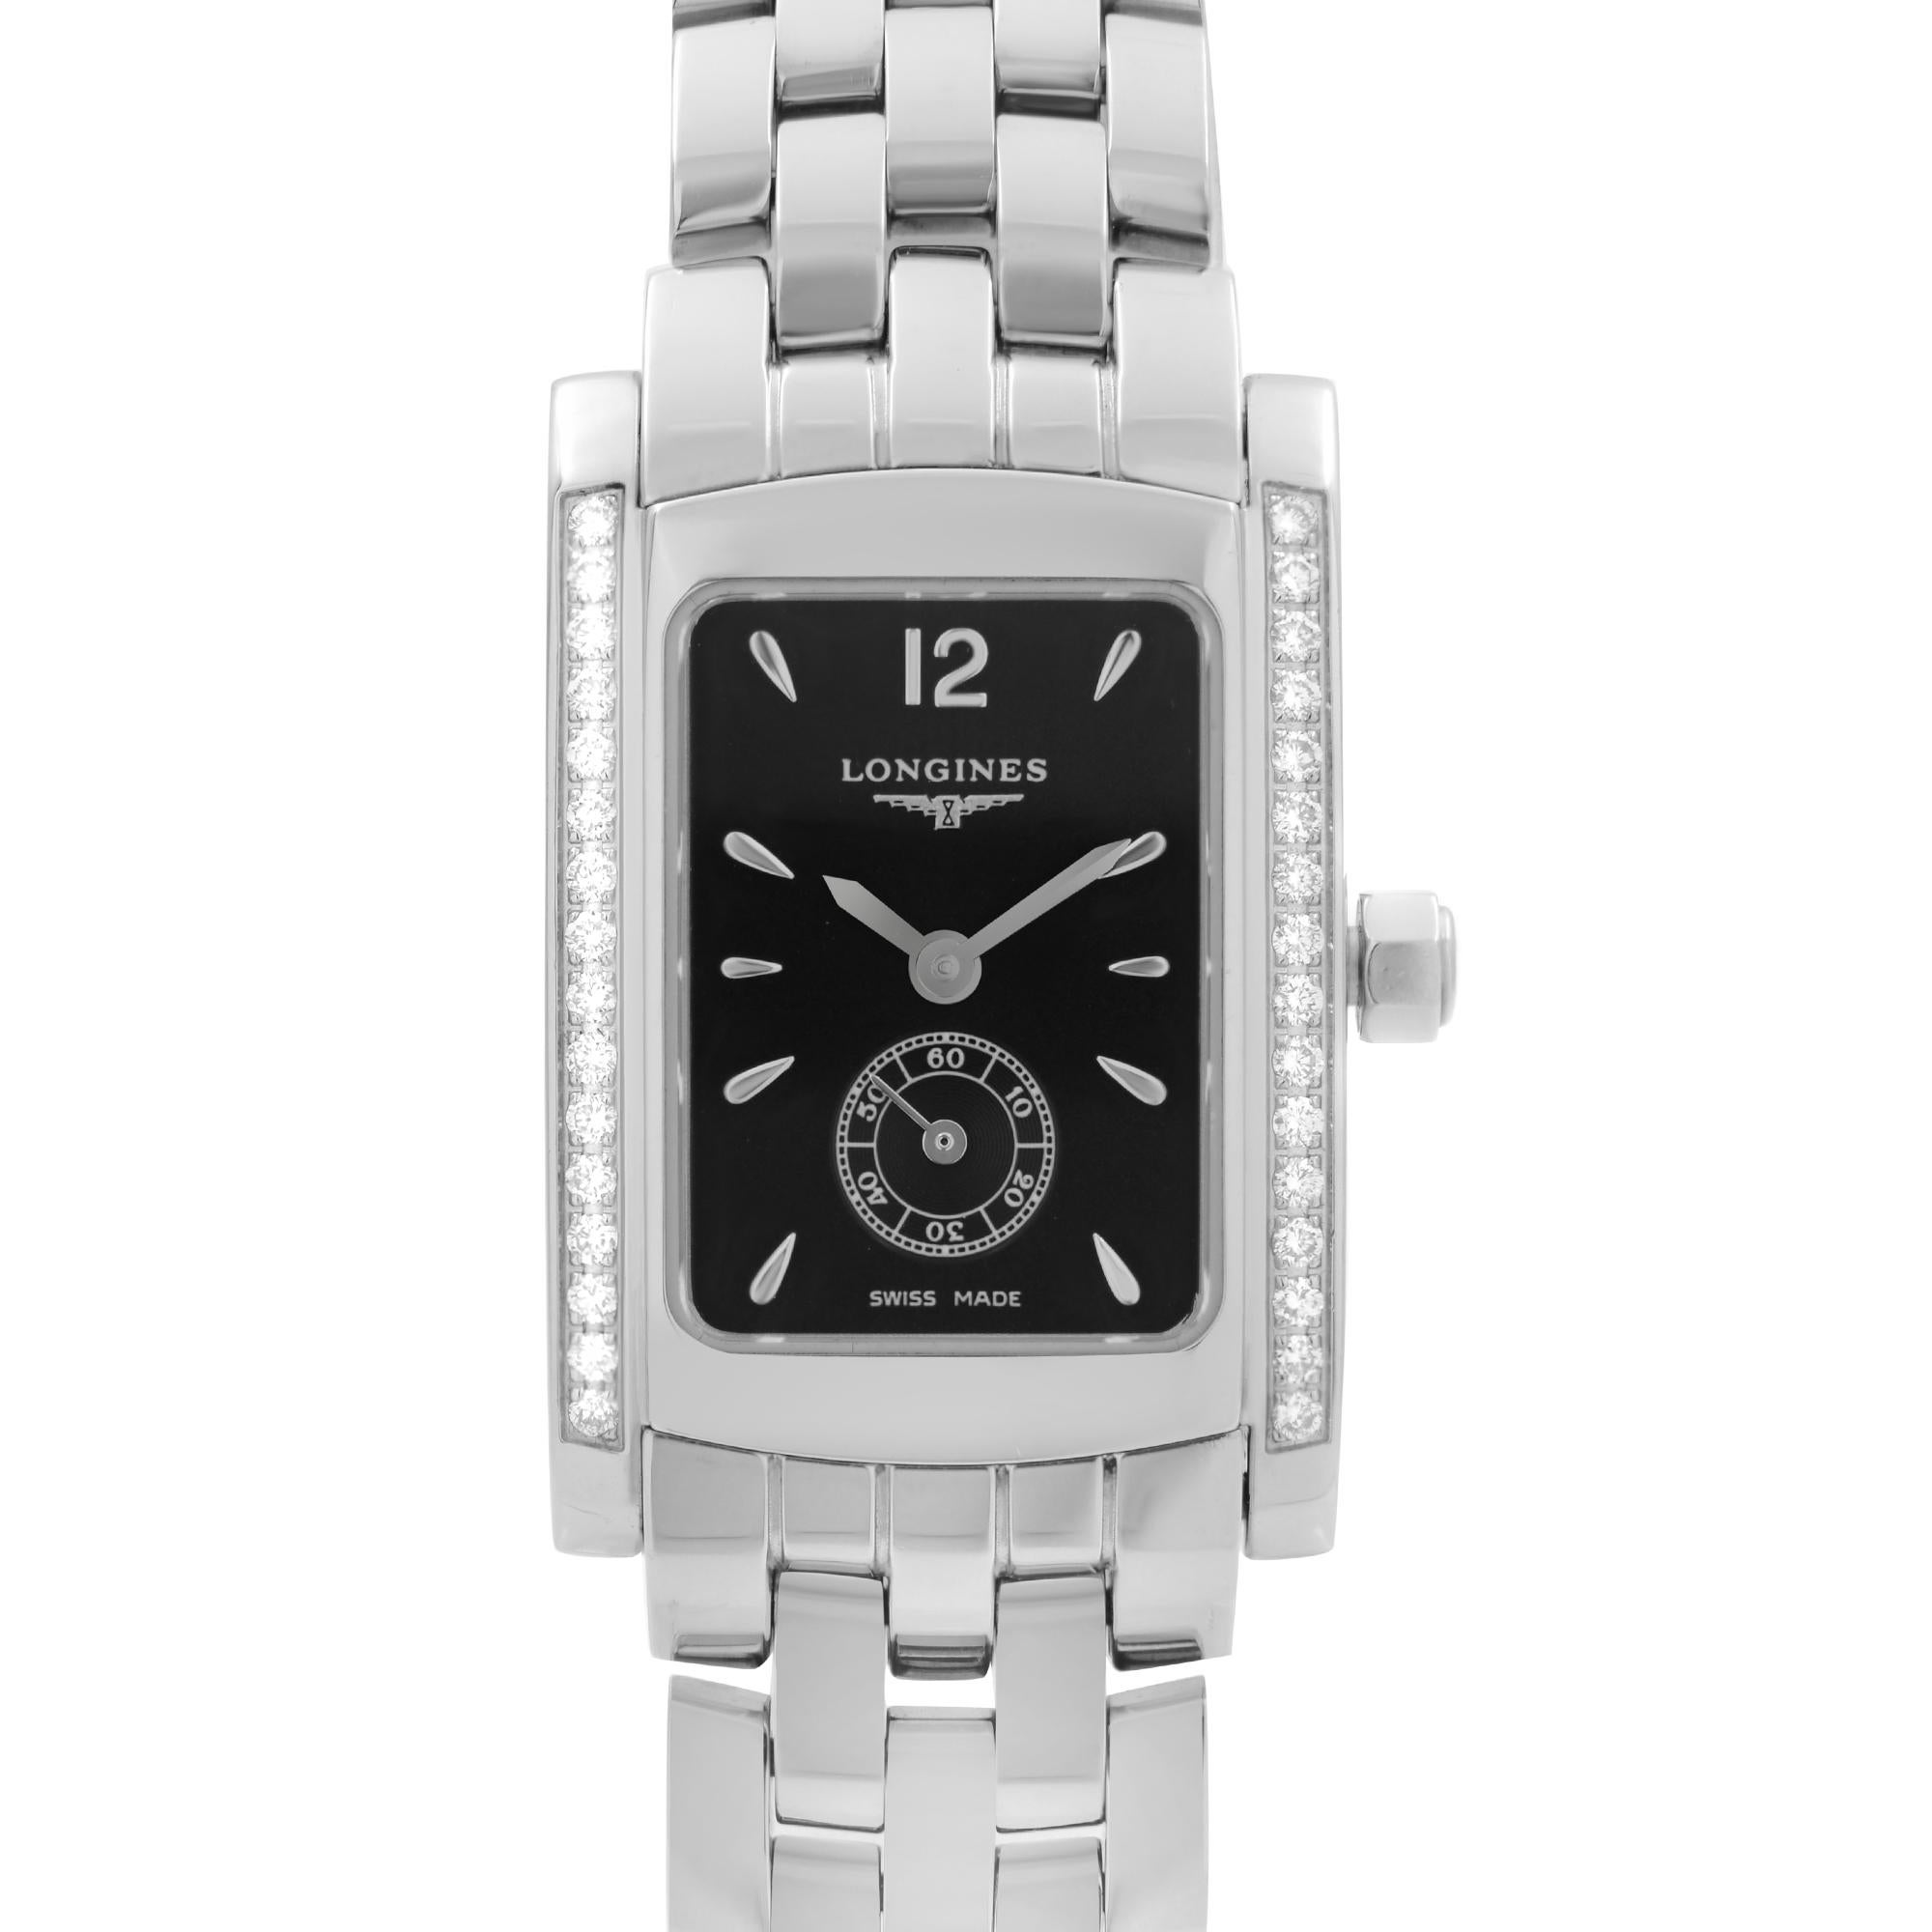 Display Model Longines Dolce Vita Stainless Steel Diamond Black Dial Quartz Ladies Watch L5.155.0.76.6. This Beautiful Timepiece is Powered by Quartz (Battery) Movement And Features: Rectangular ​Stainless Steel Case Set with Diamonds with a